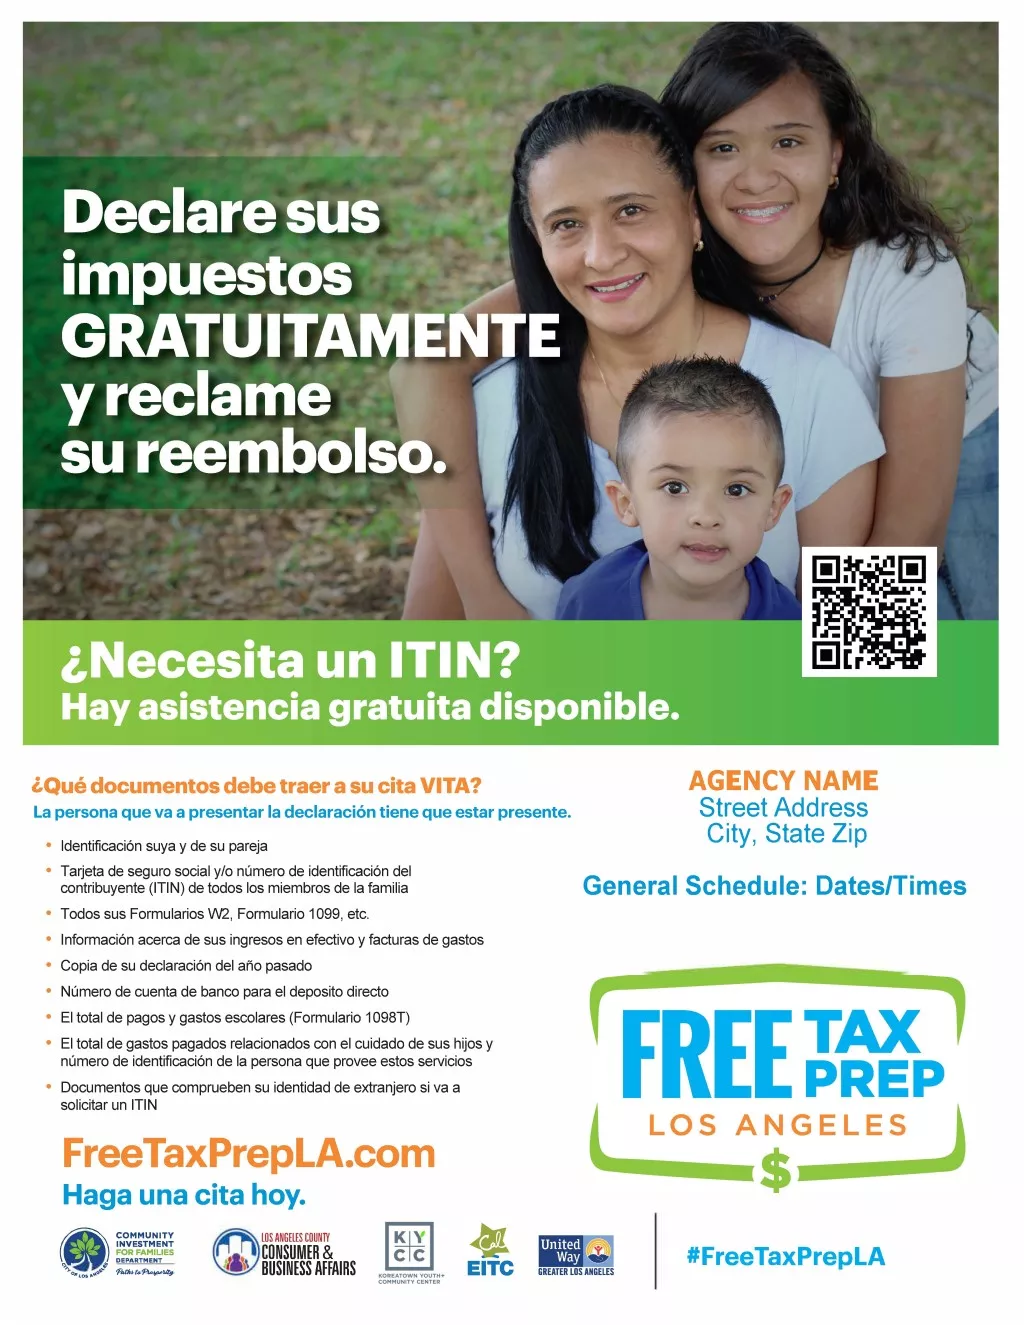 The Spanish FTPLA Flyer in color with a parent, child, and a younger child and a QR code can be scan.  